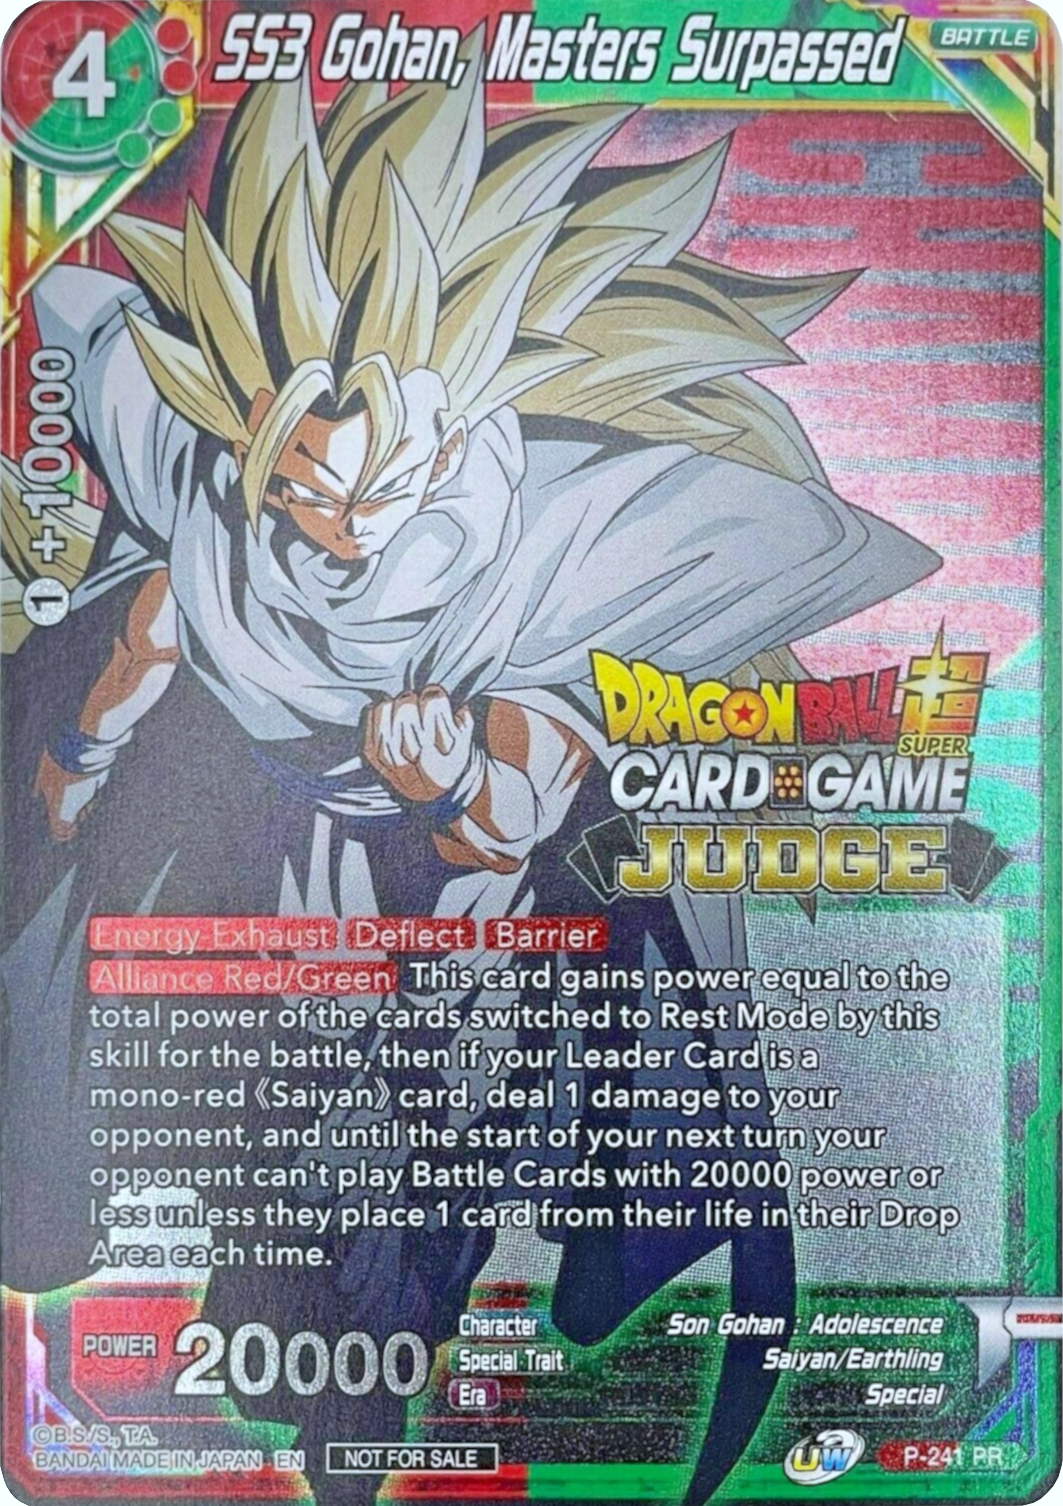 SS3 Gohan, Masters Surpassed (Level 2) (P-241) [Promotion Cards] | Pegasus Games WI